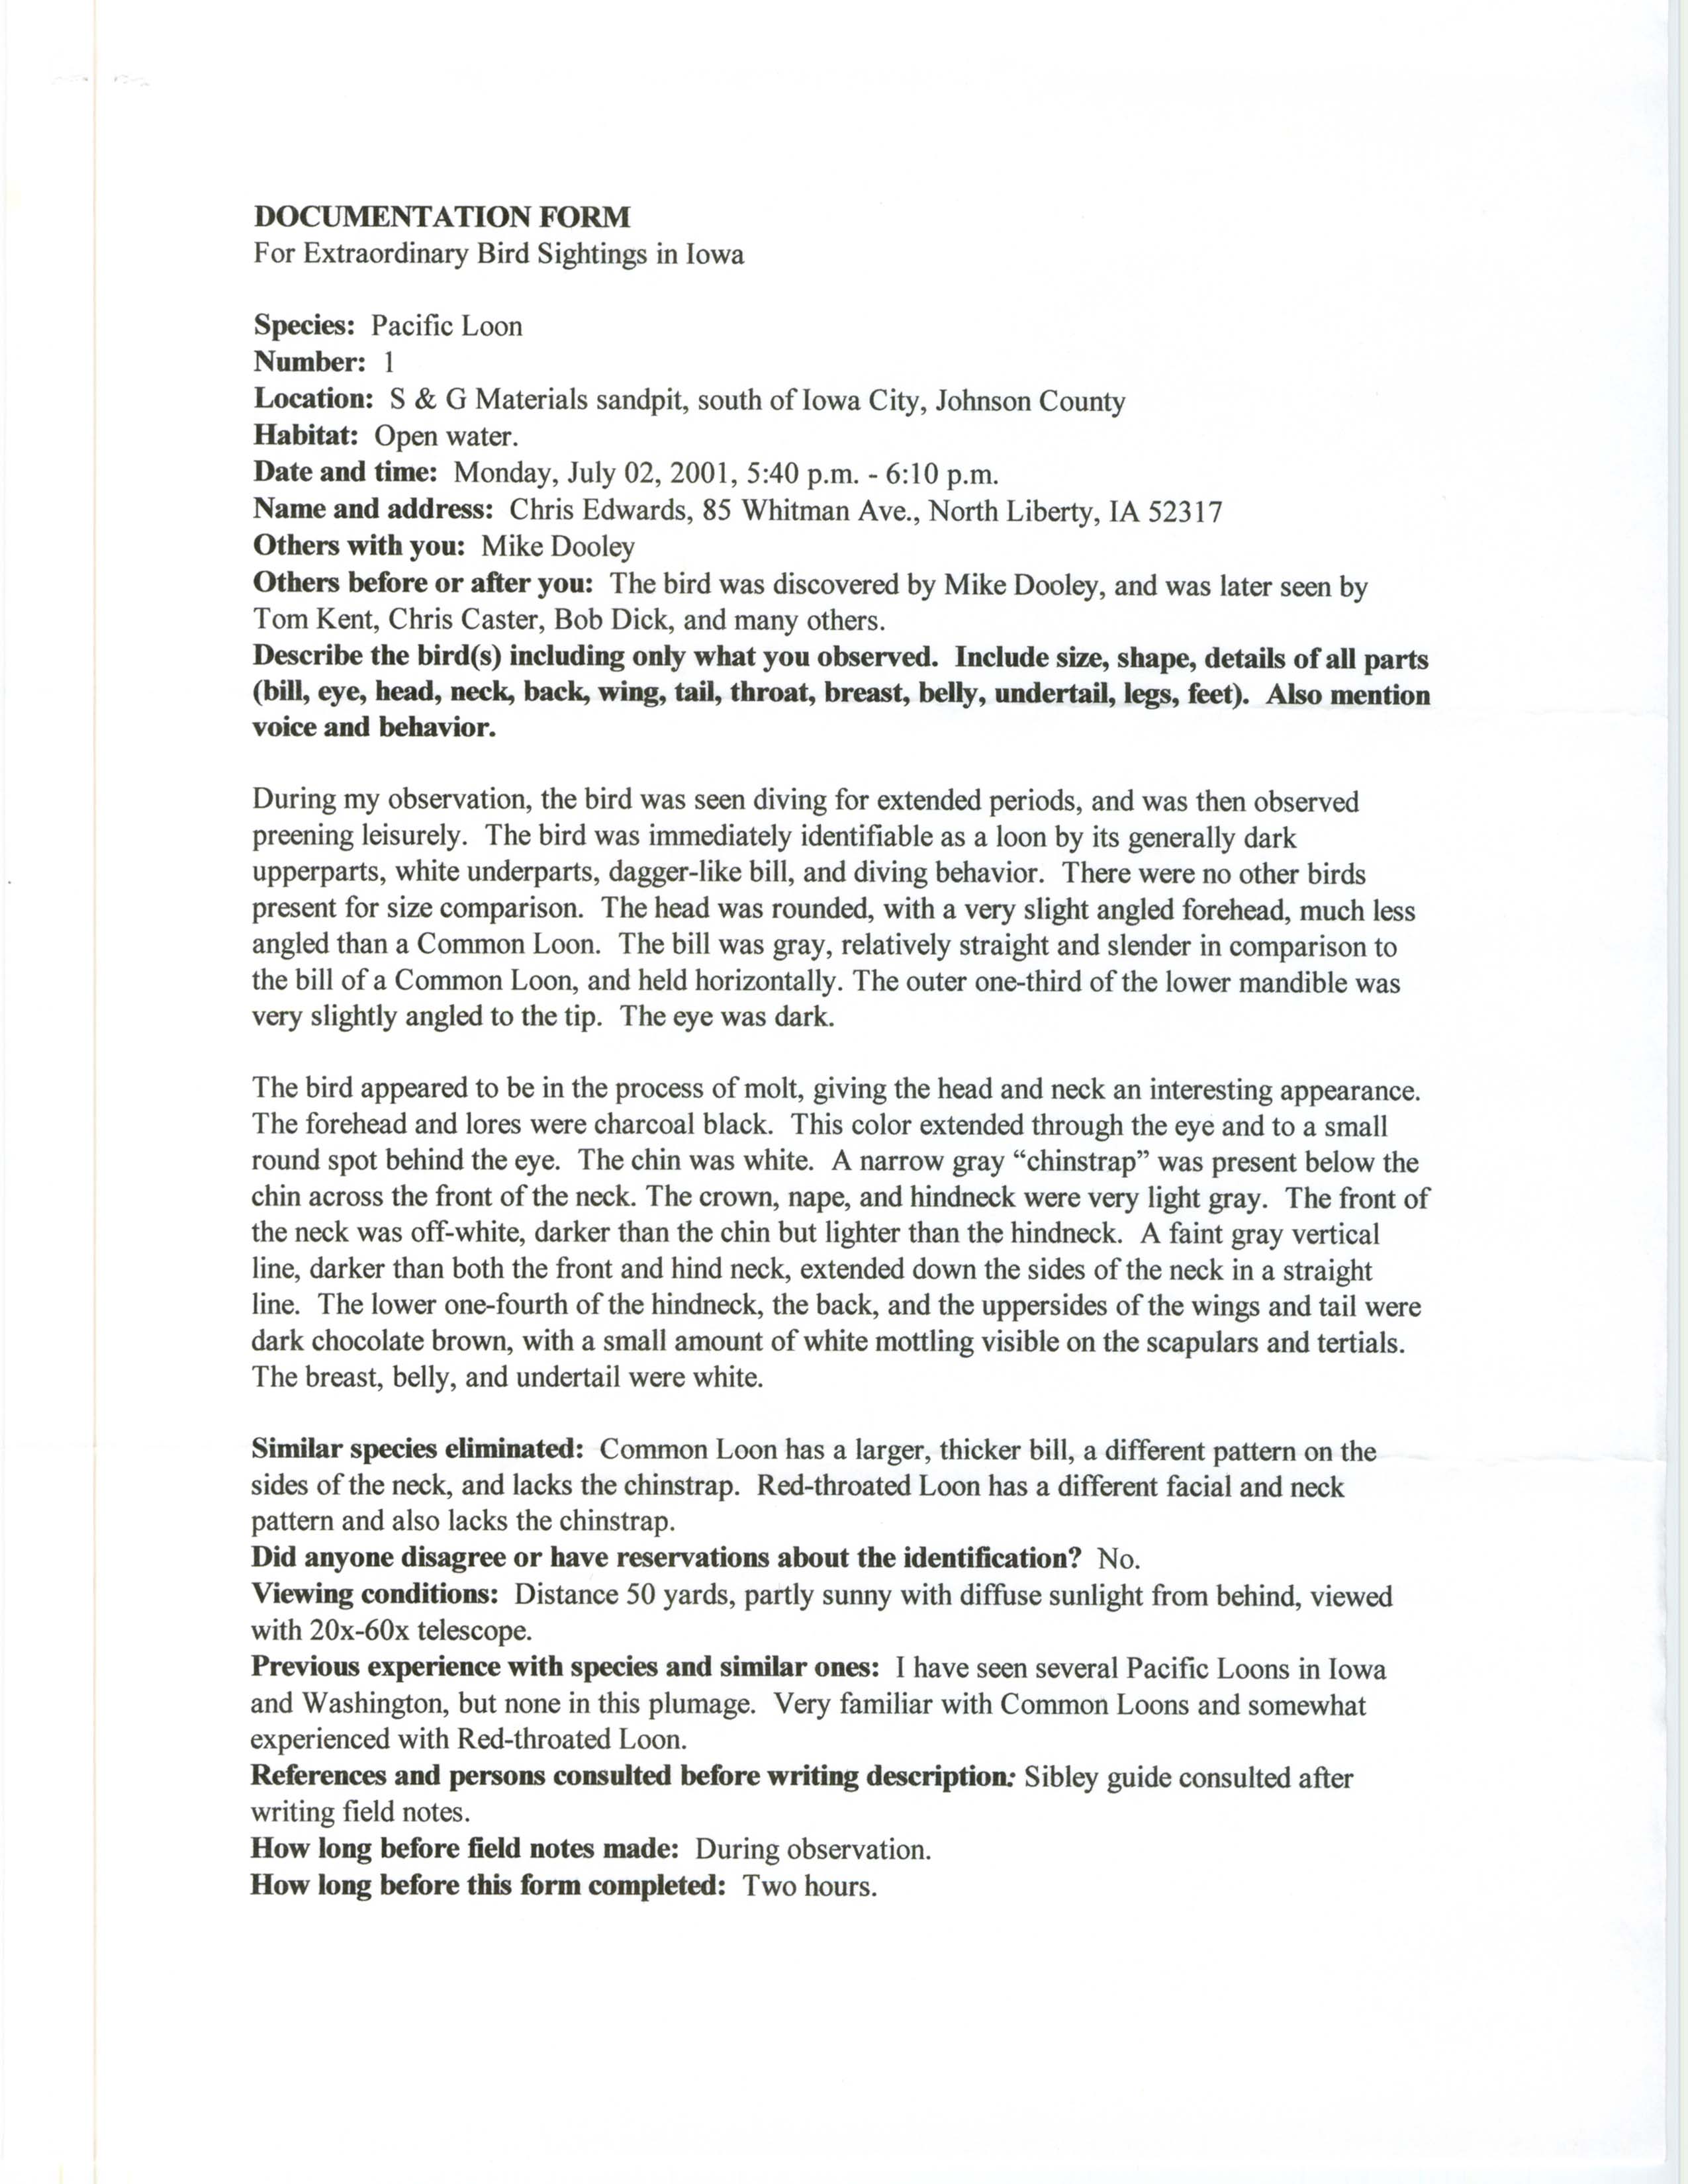 Documentation form for extraordinary bird sightings in Iowa, Pacific Loon, Chris Edwards, July 2, 2001